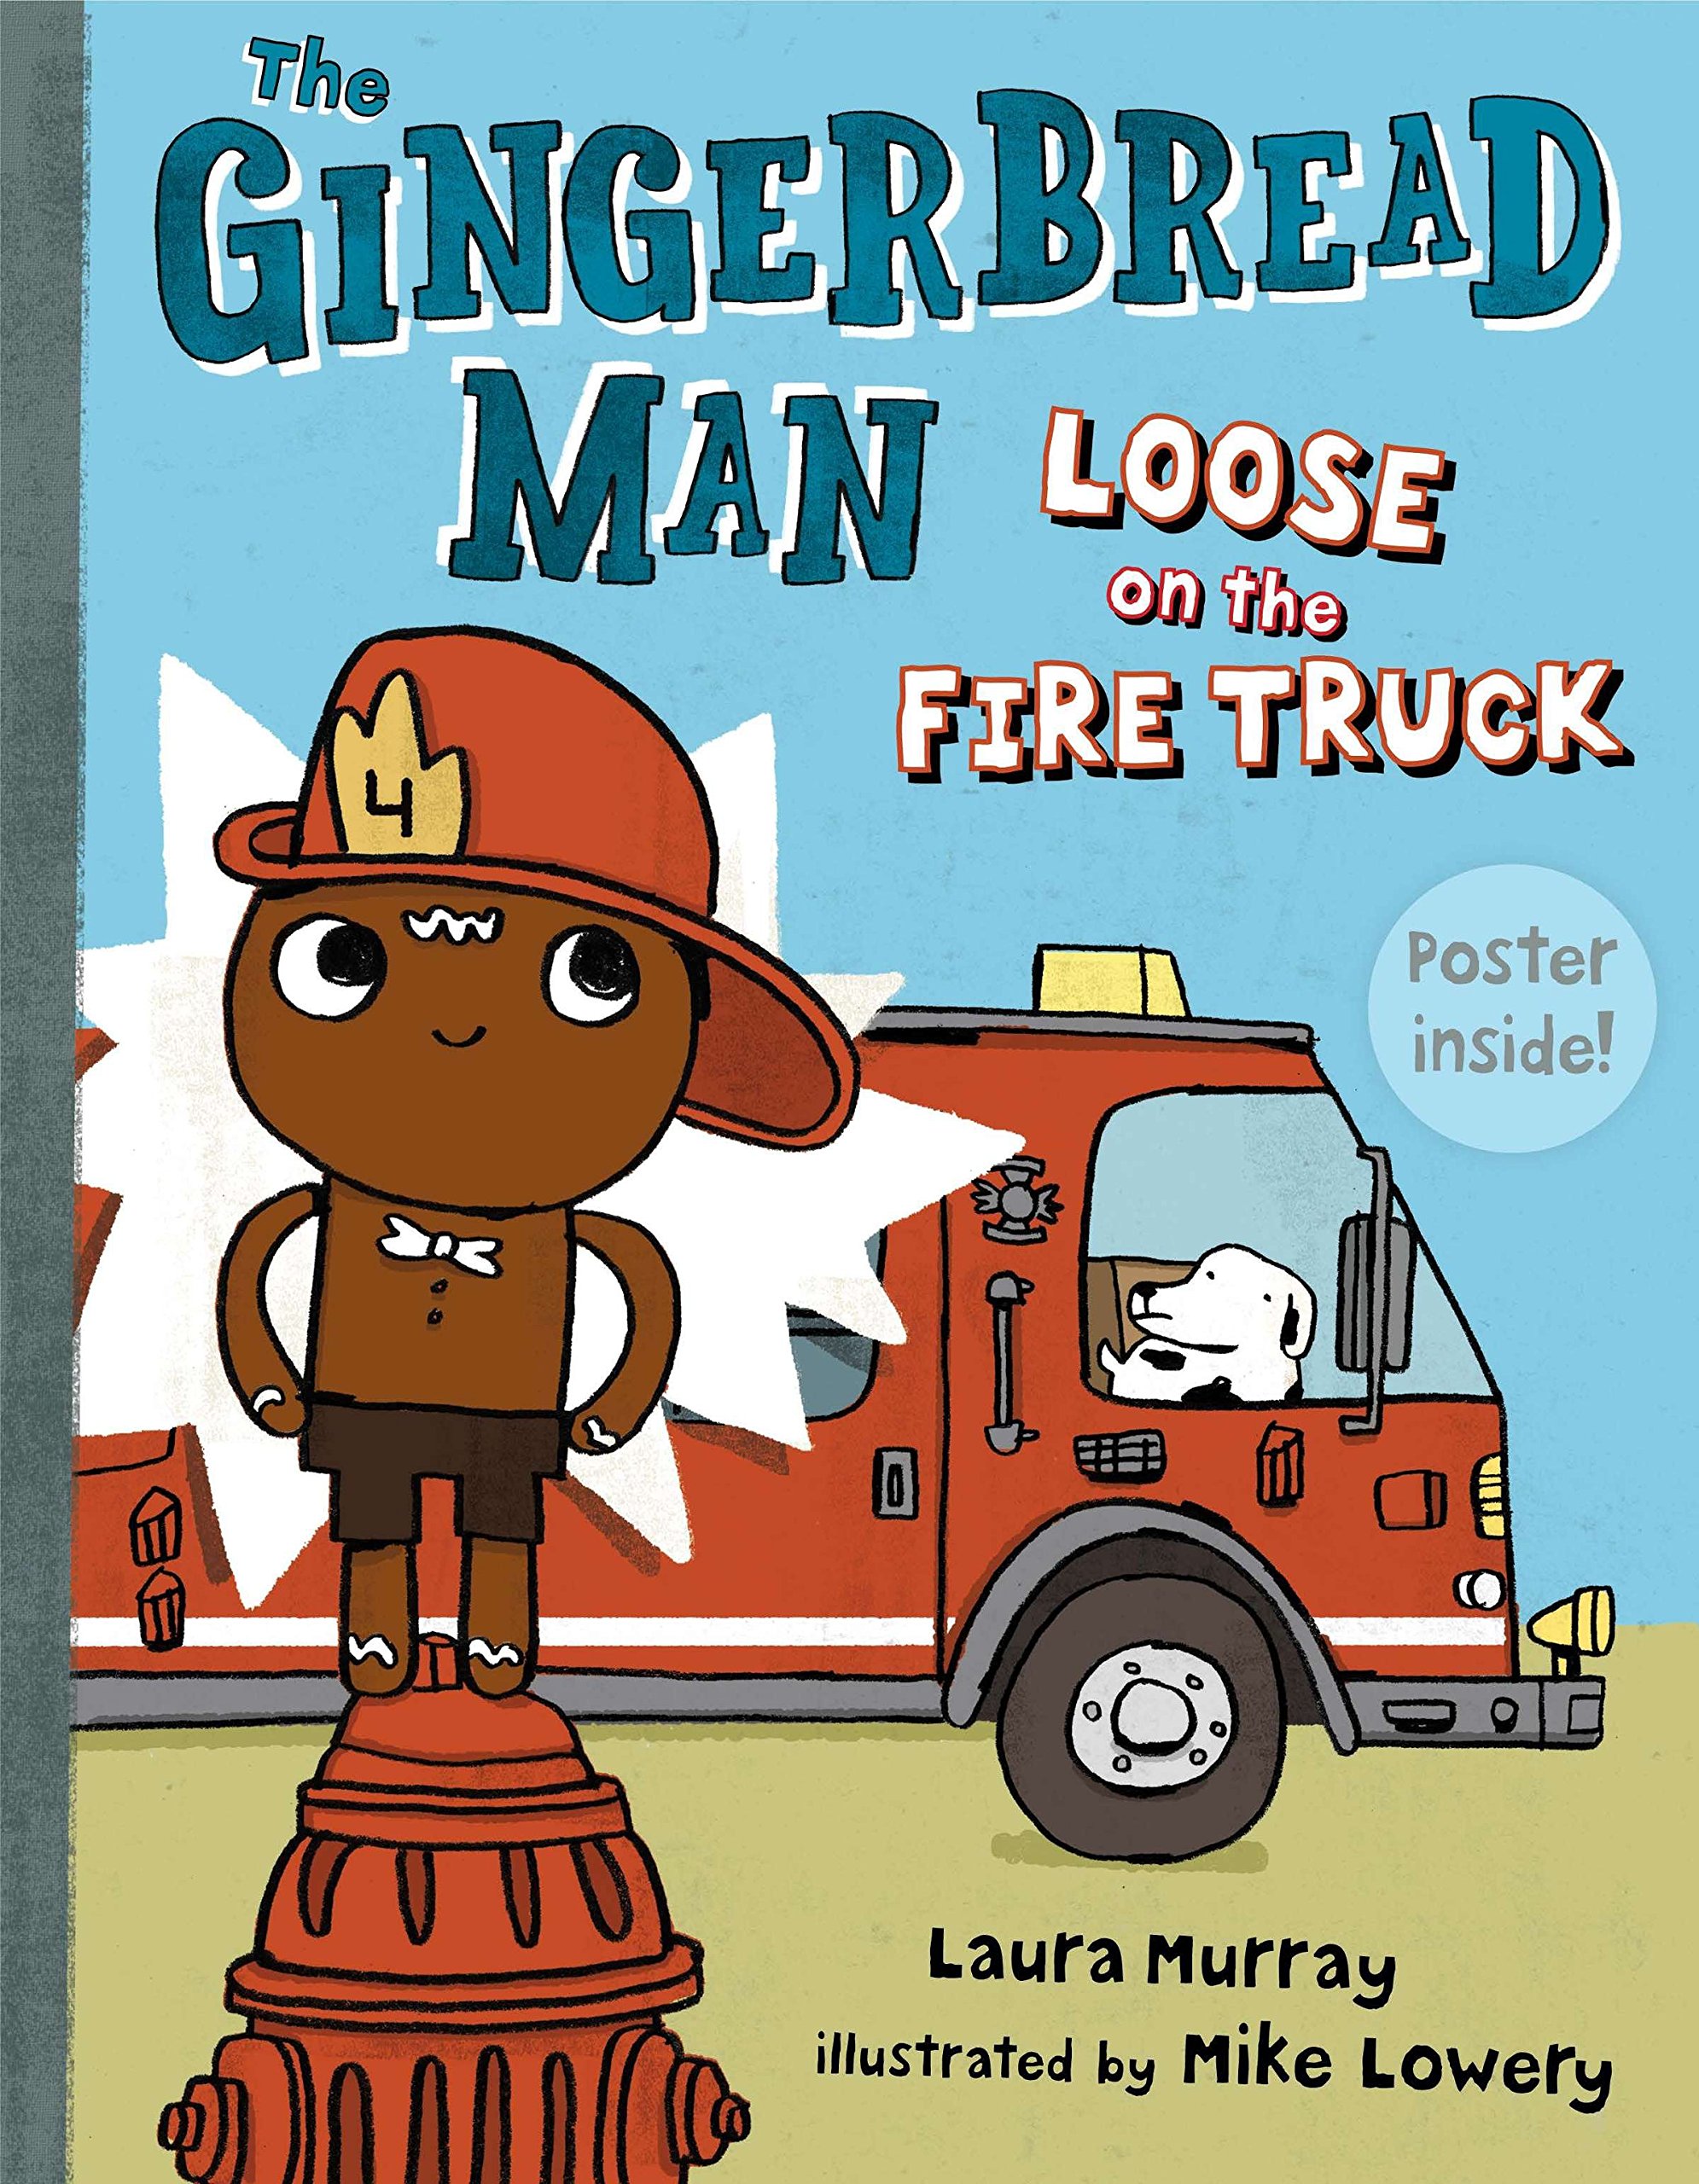 speech and language teaching concepts for the gingerbread man loose on the firetruck in speech therapy